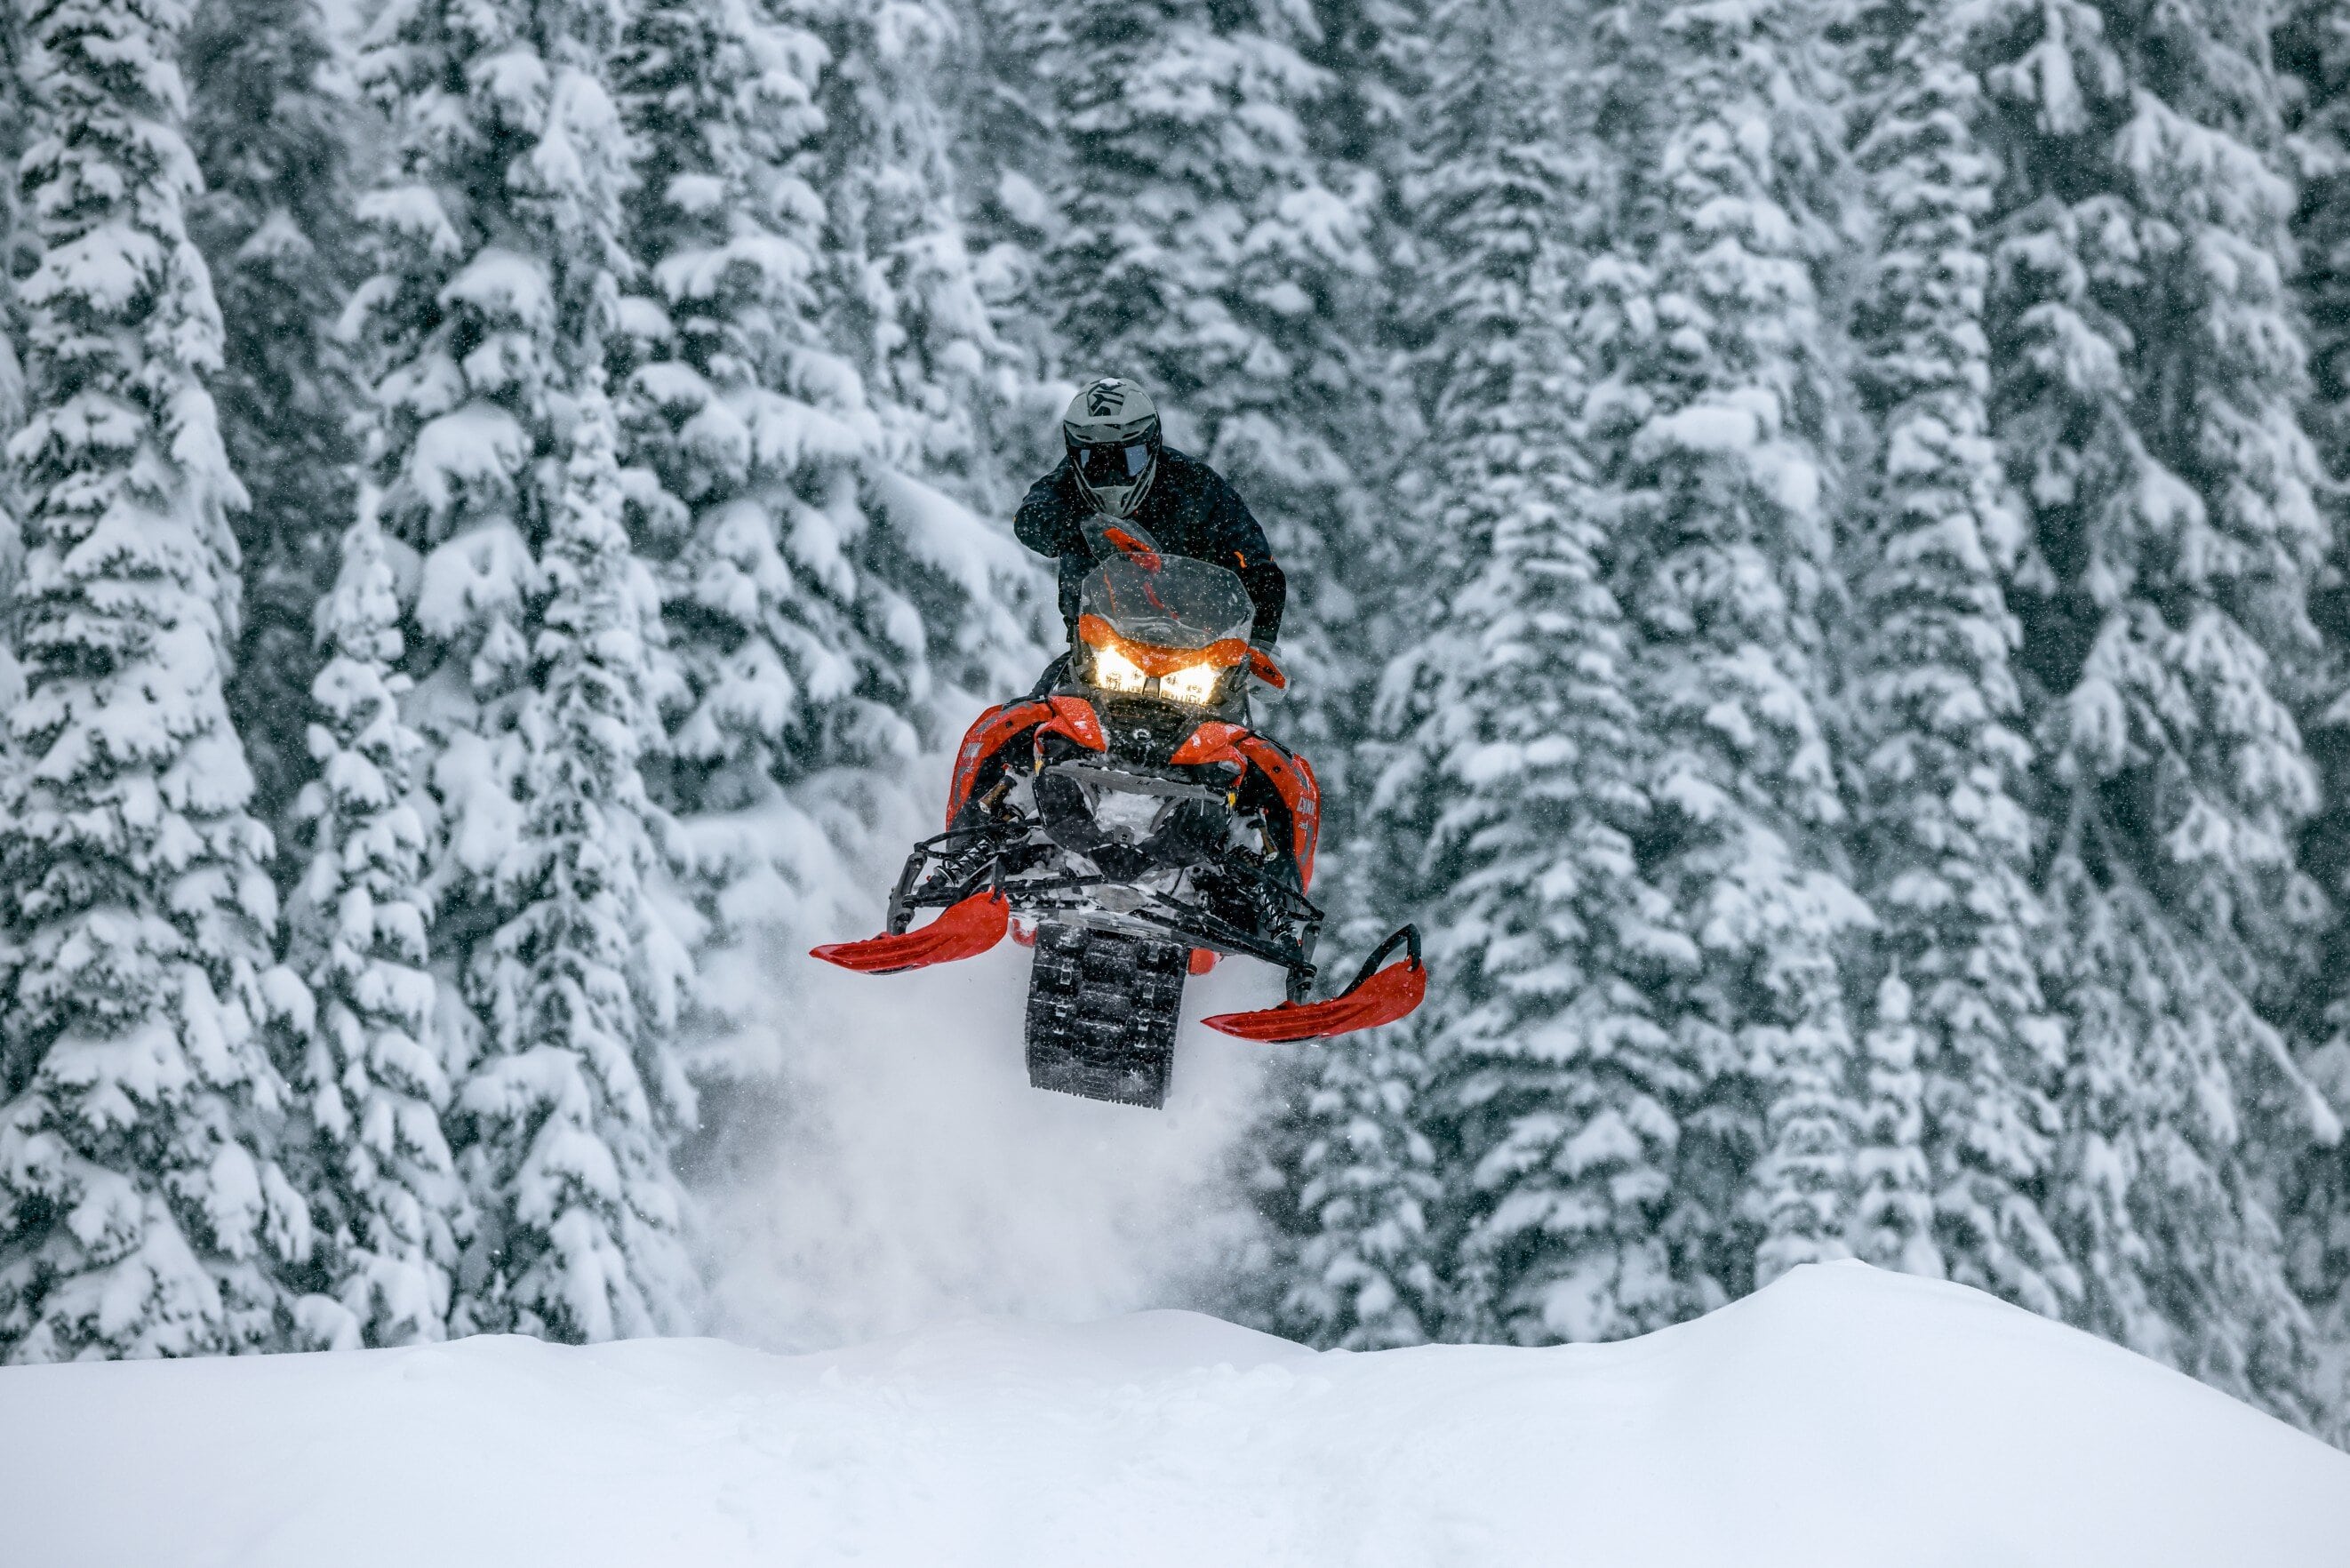 Snowmobile rider jumping with his Lynx Xterrain RE